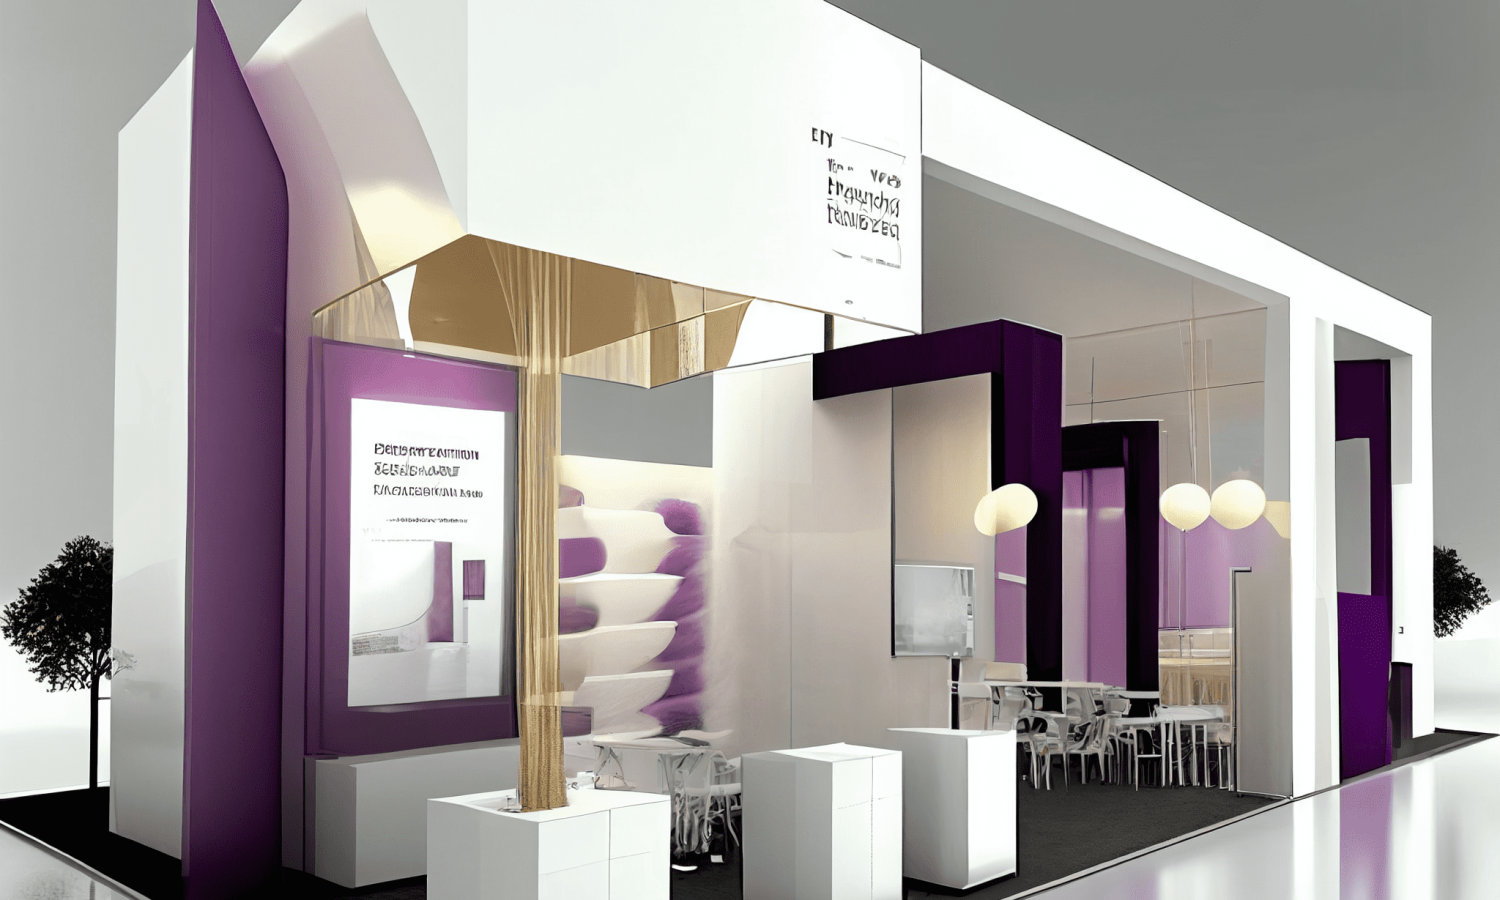 Seo333wd_make_a_very_big_Exhibition_stand_concept_visualized_with_a515cf26-24f8-4fee-ad7b-d4a7e8f0dd13